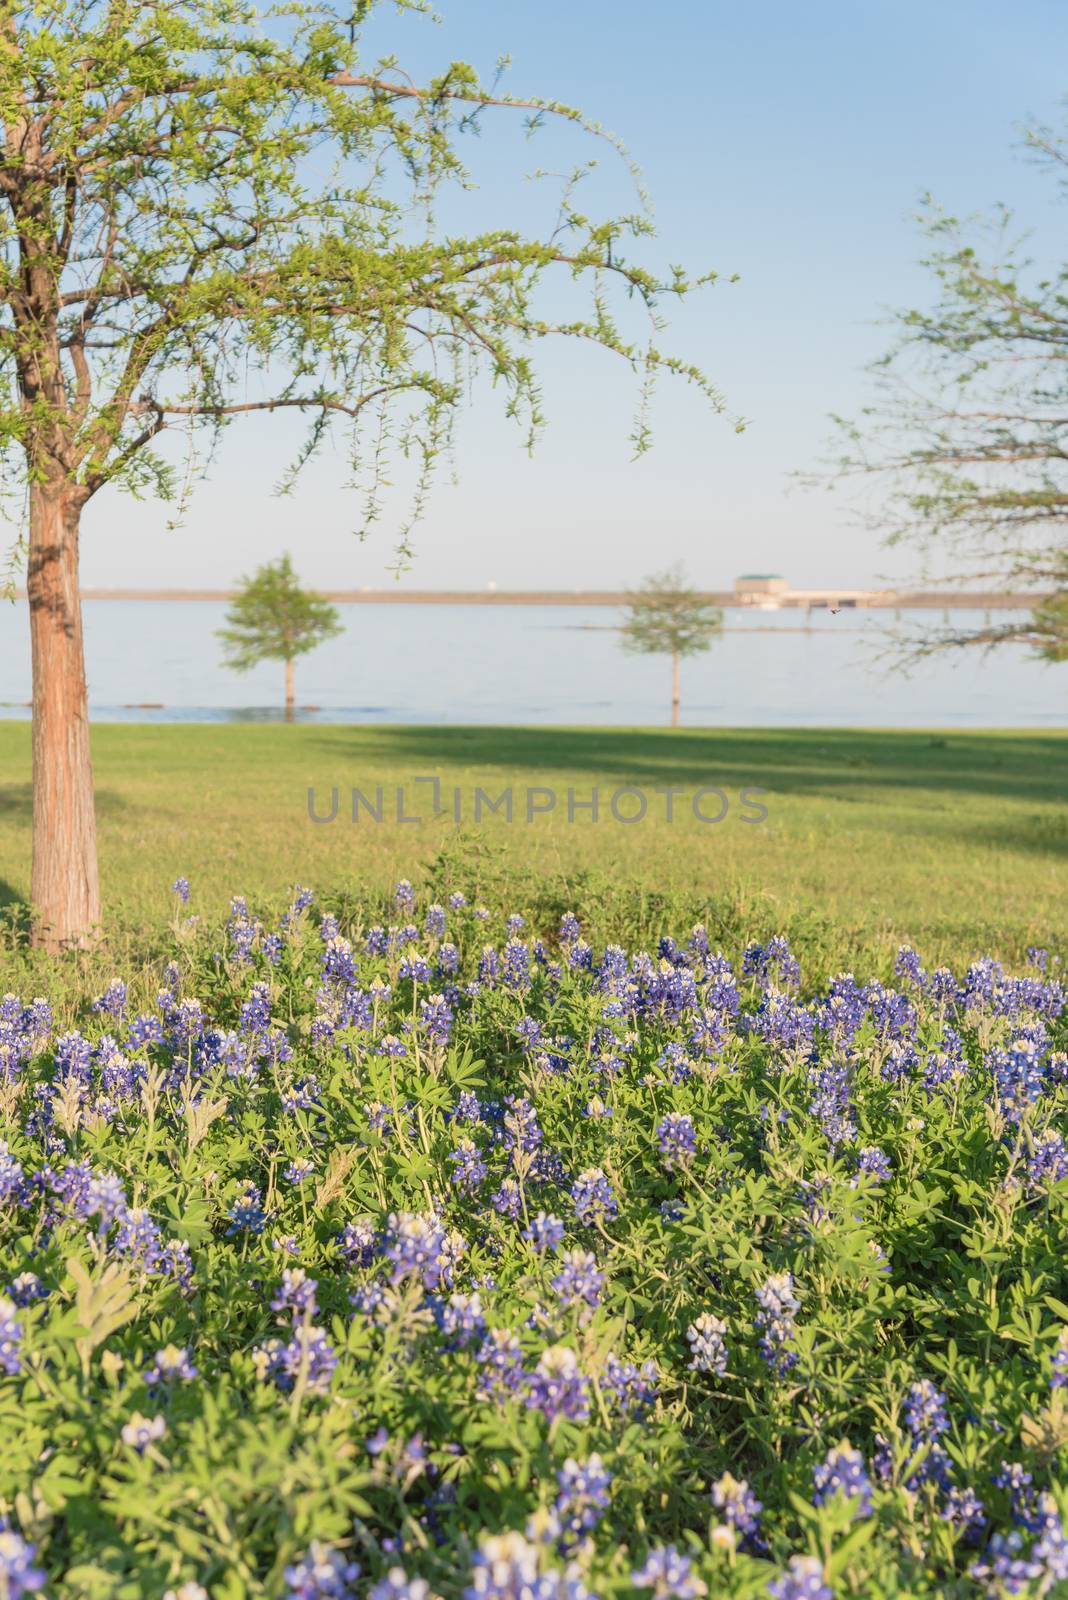 Texas state flower Bluebonnet blooming near the lake in springtime by trongnguyen